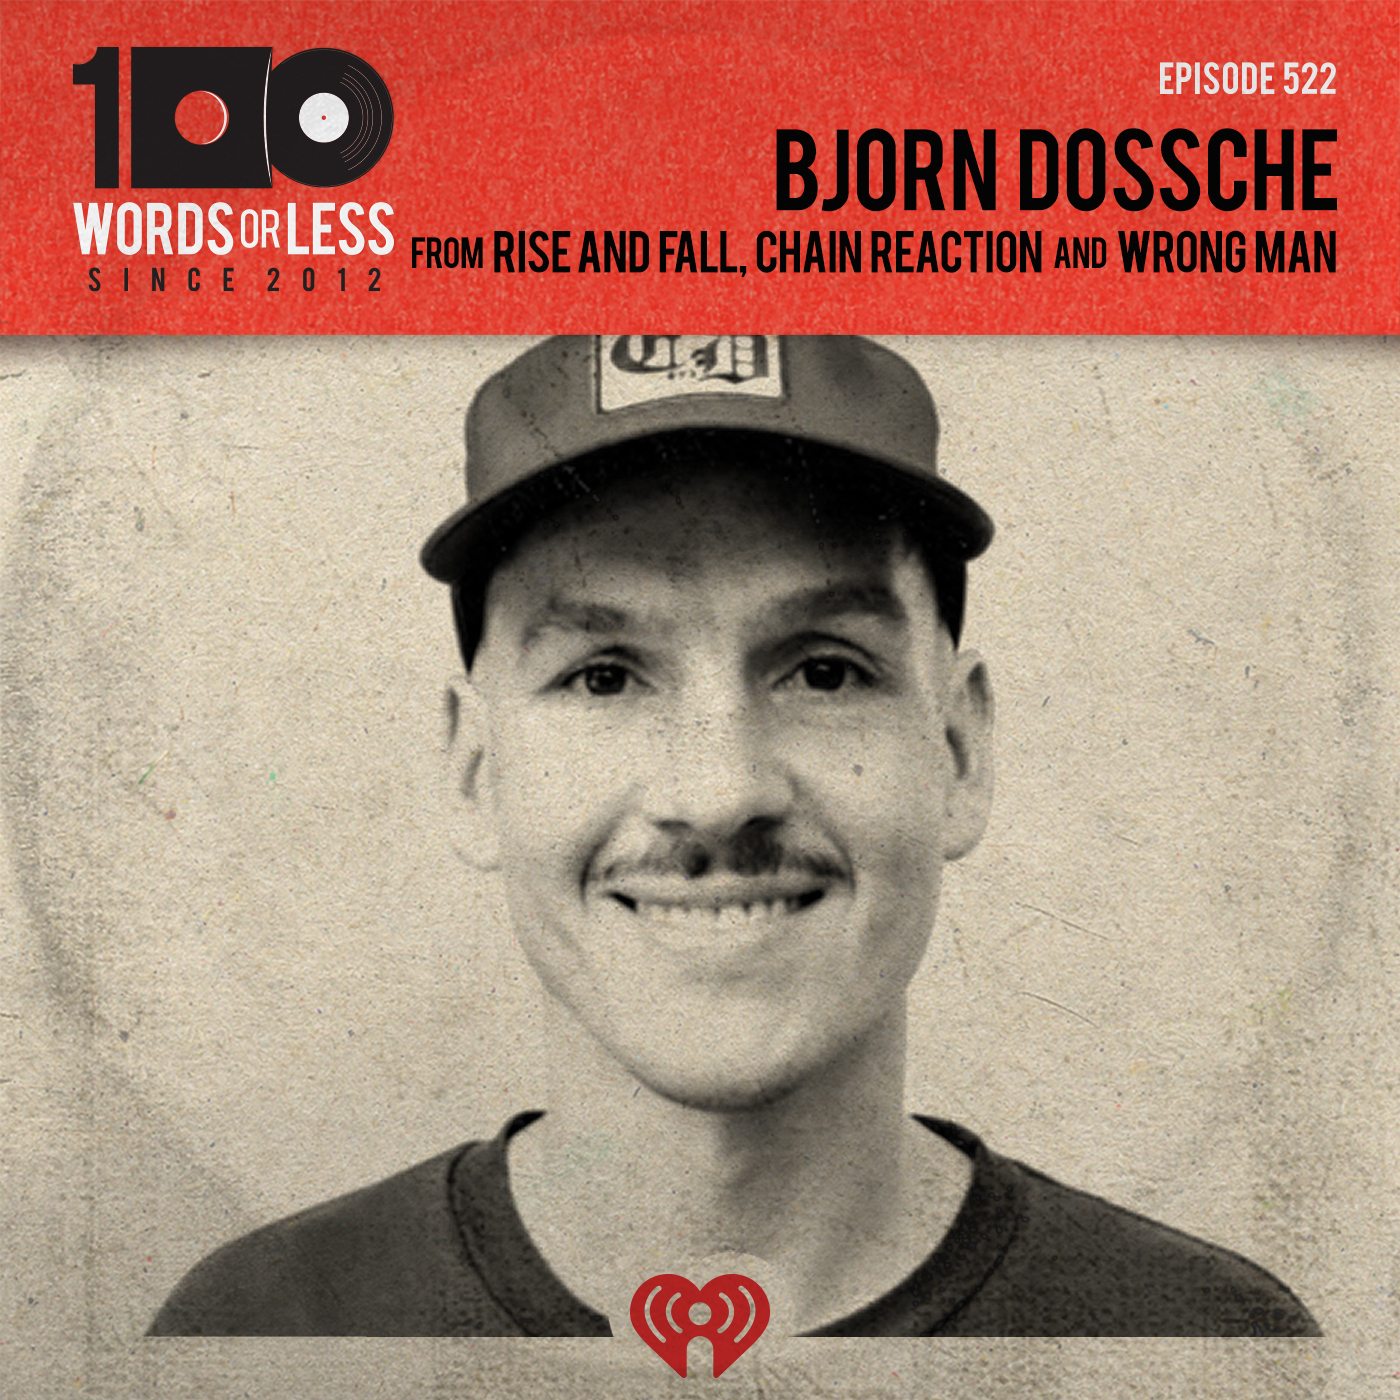 Bjorn Dossche from Rise and Fall, Chain Reaction and Wrong Man